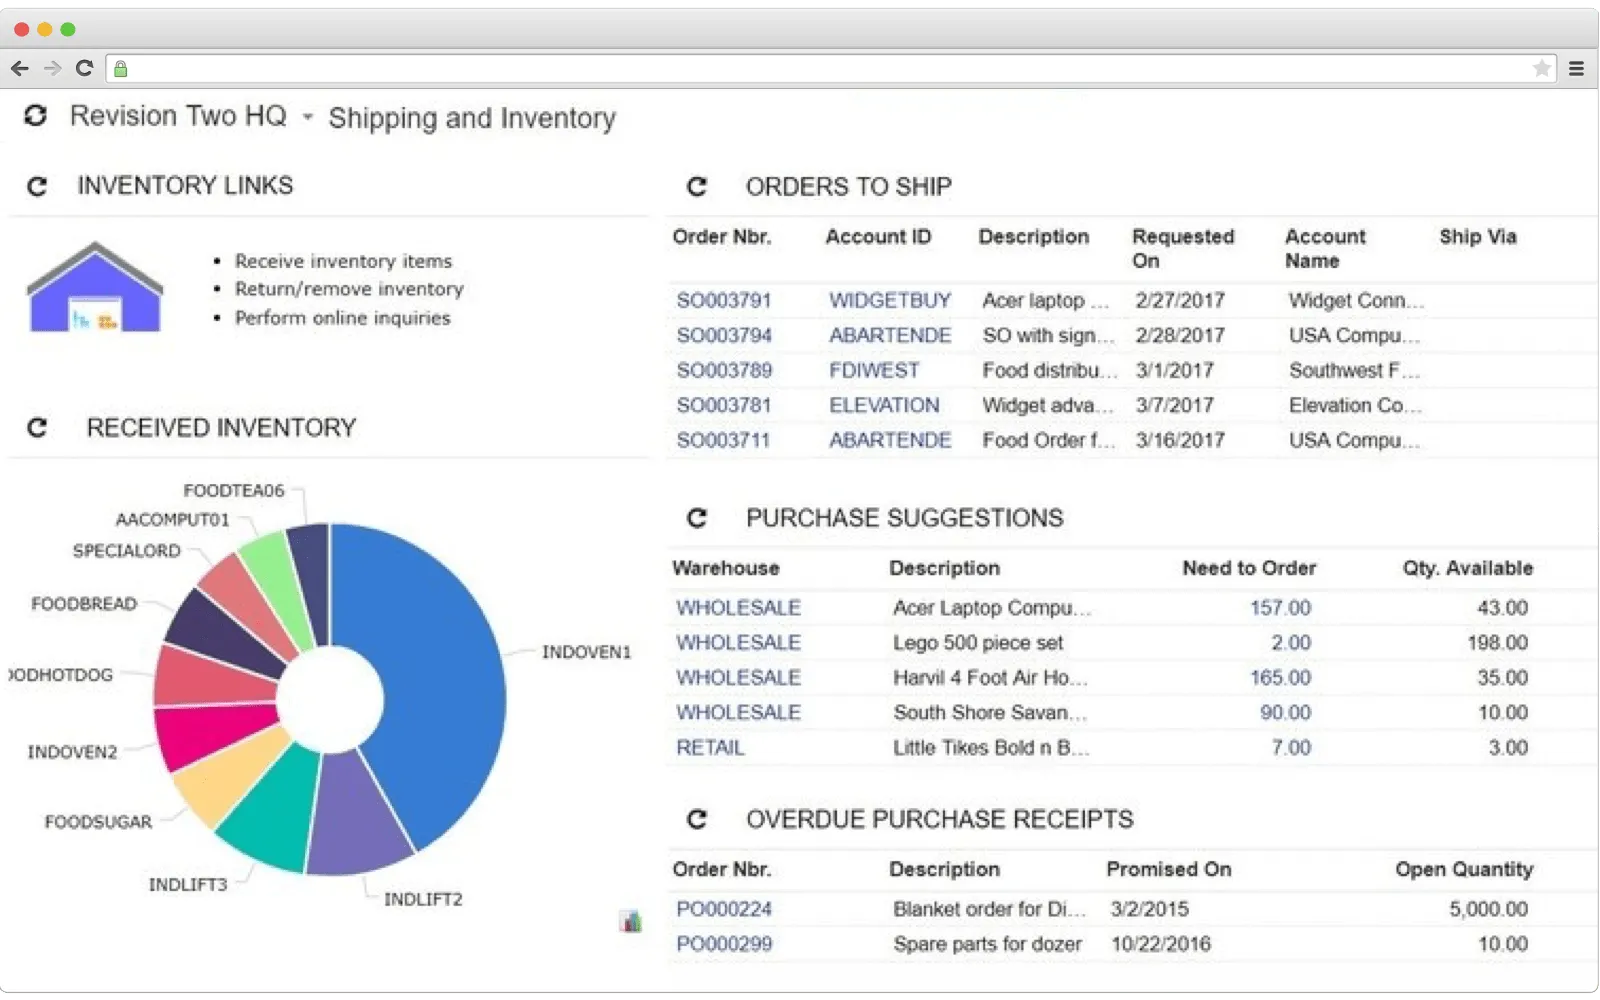 How shipping and inventory details look like in ERP